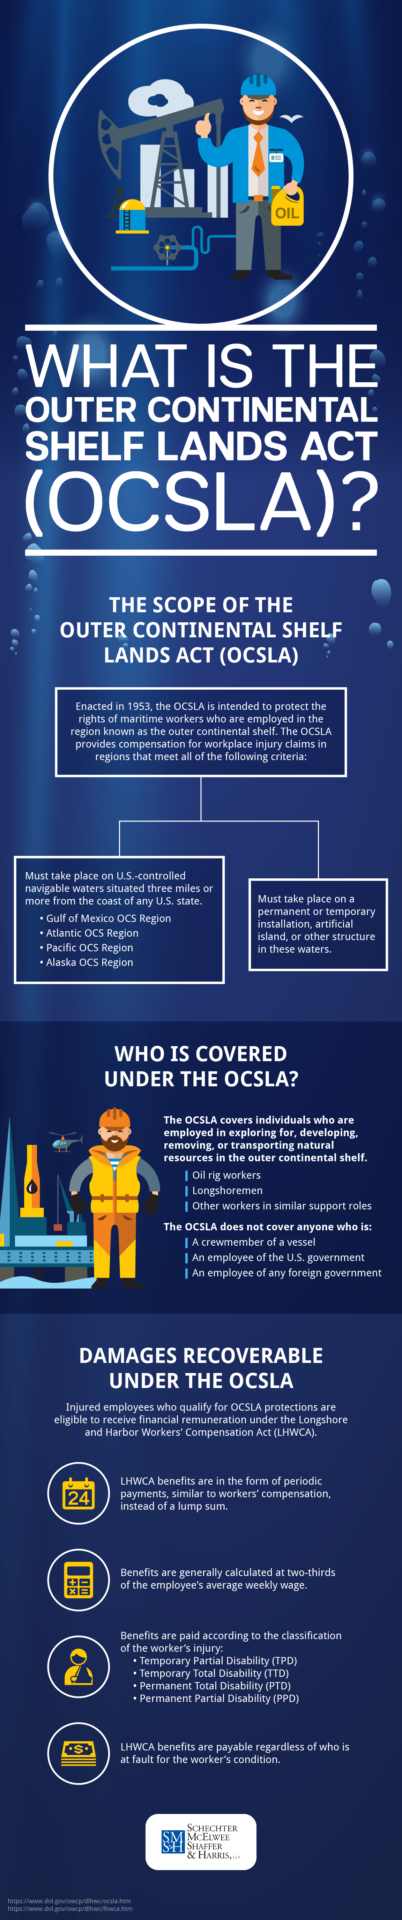 What Is the Outer Continental Shelf Lands Act (OCSLA)?